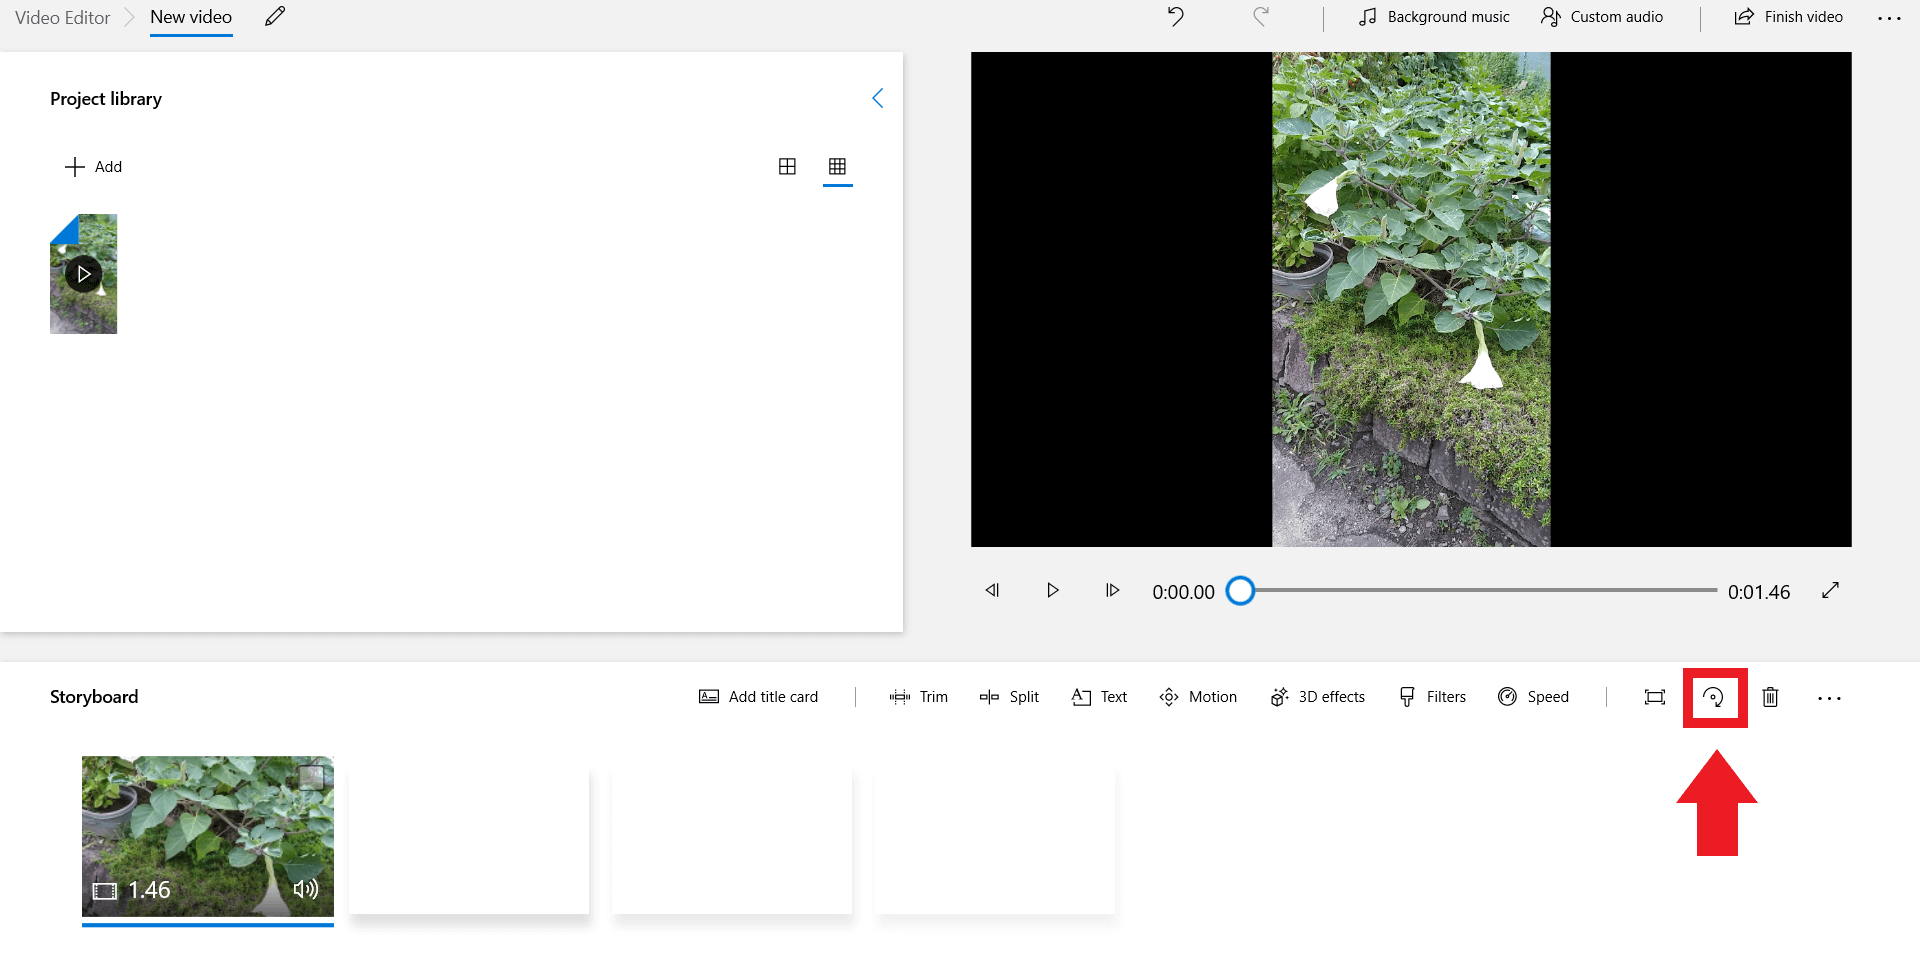 Align your video by clicking on the rotation icon